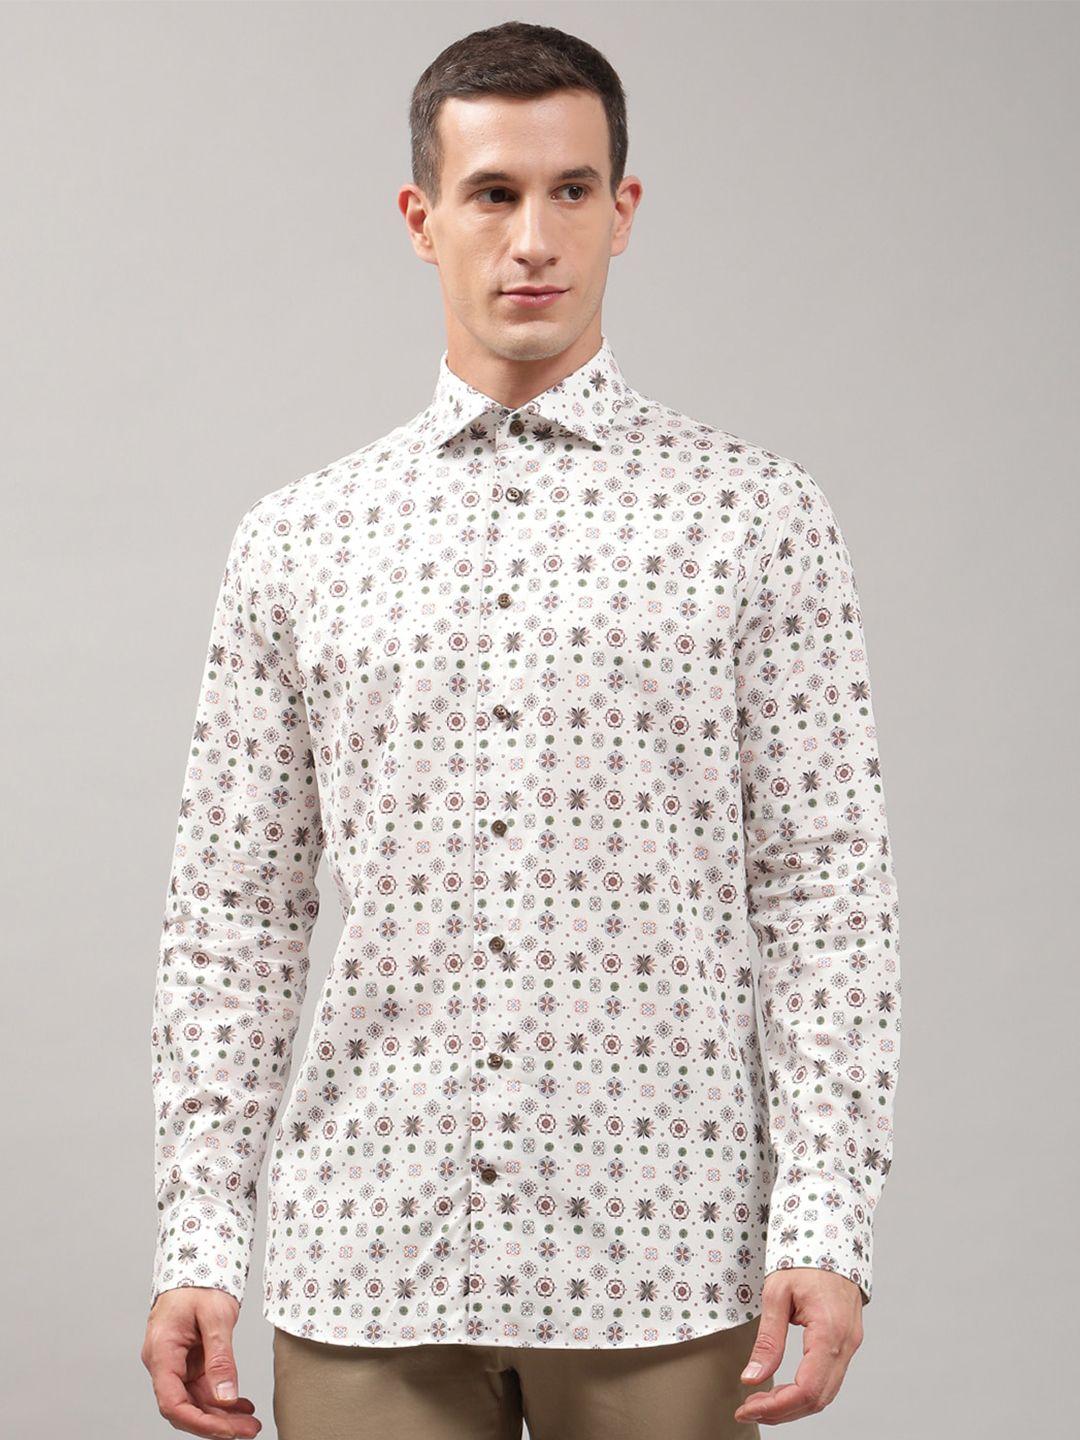 matinique-men-white-floral-printed-casual-shirt